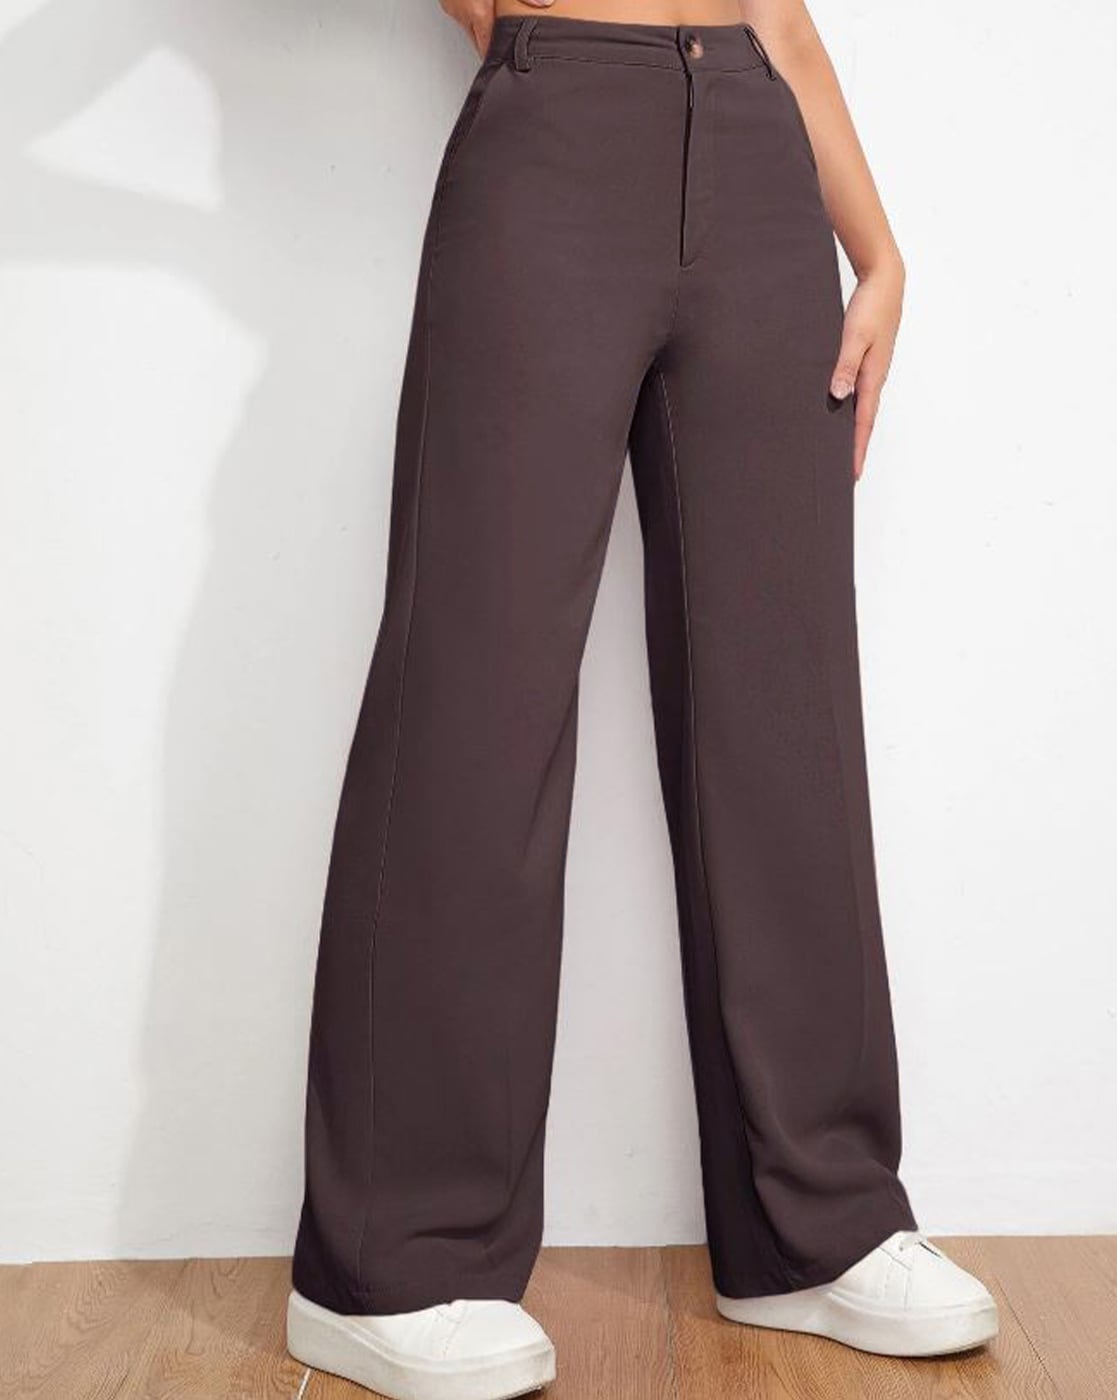 ICICLE Dew high-waisted trousers | High waisted trousers, Ethical clothing,  Clothes design